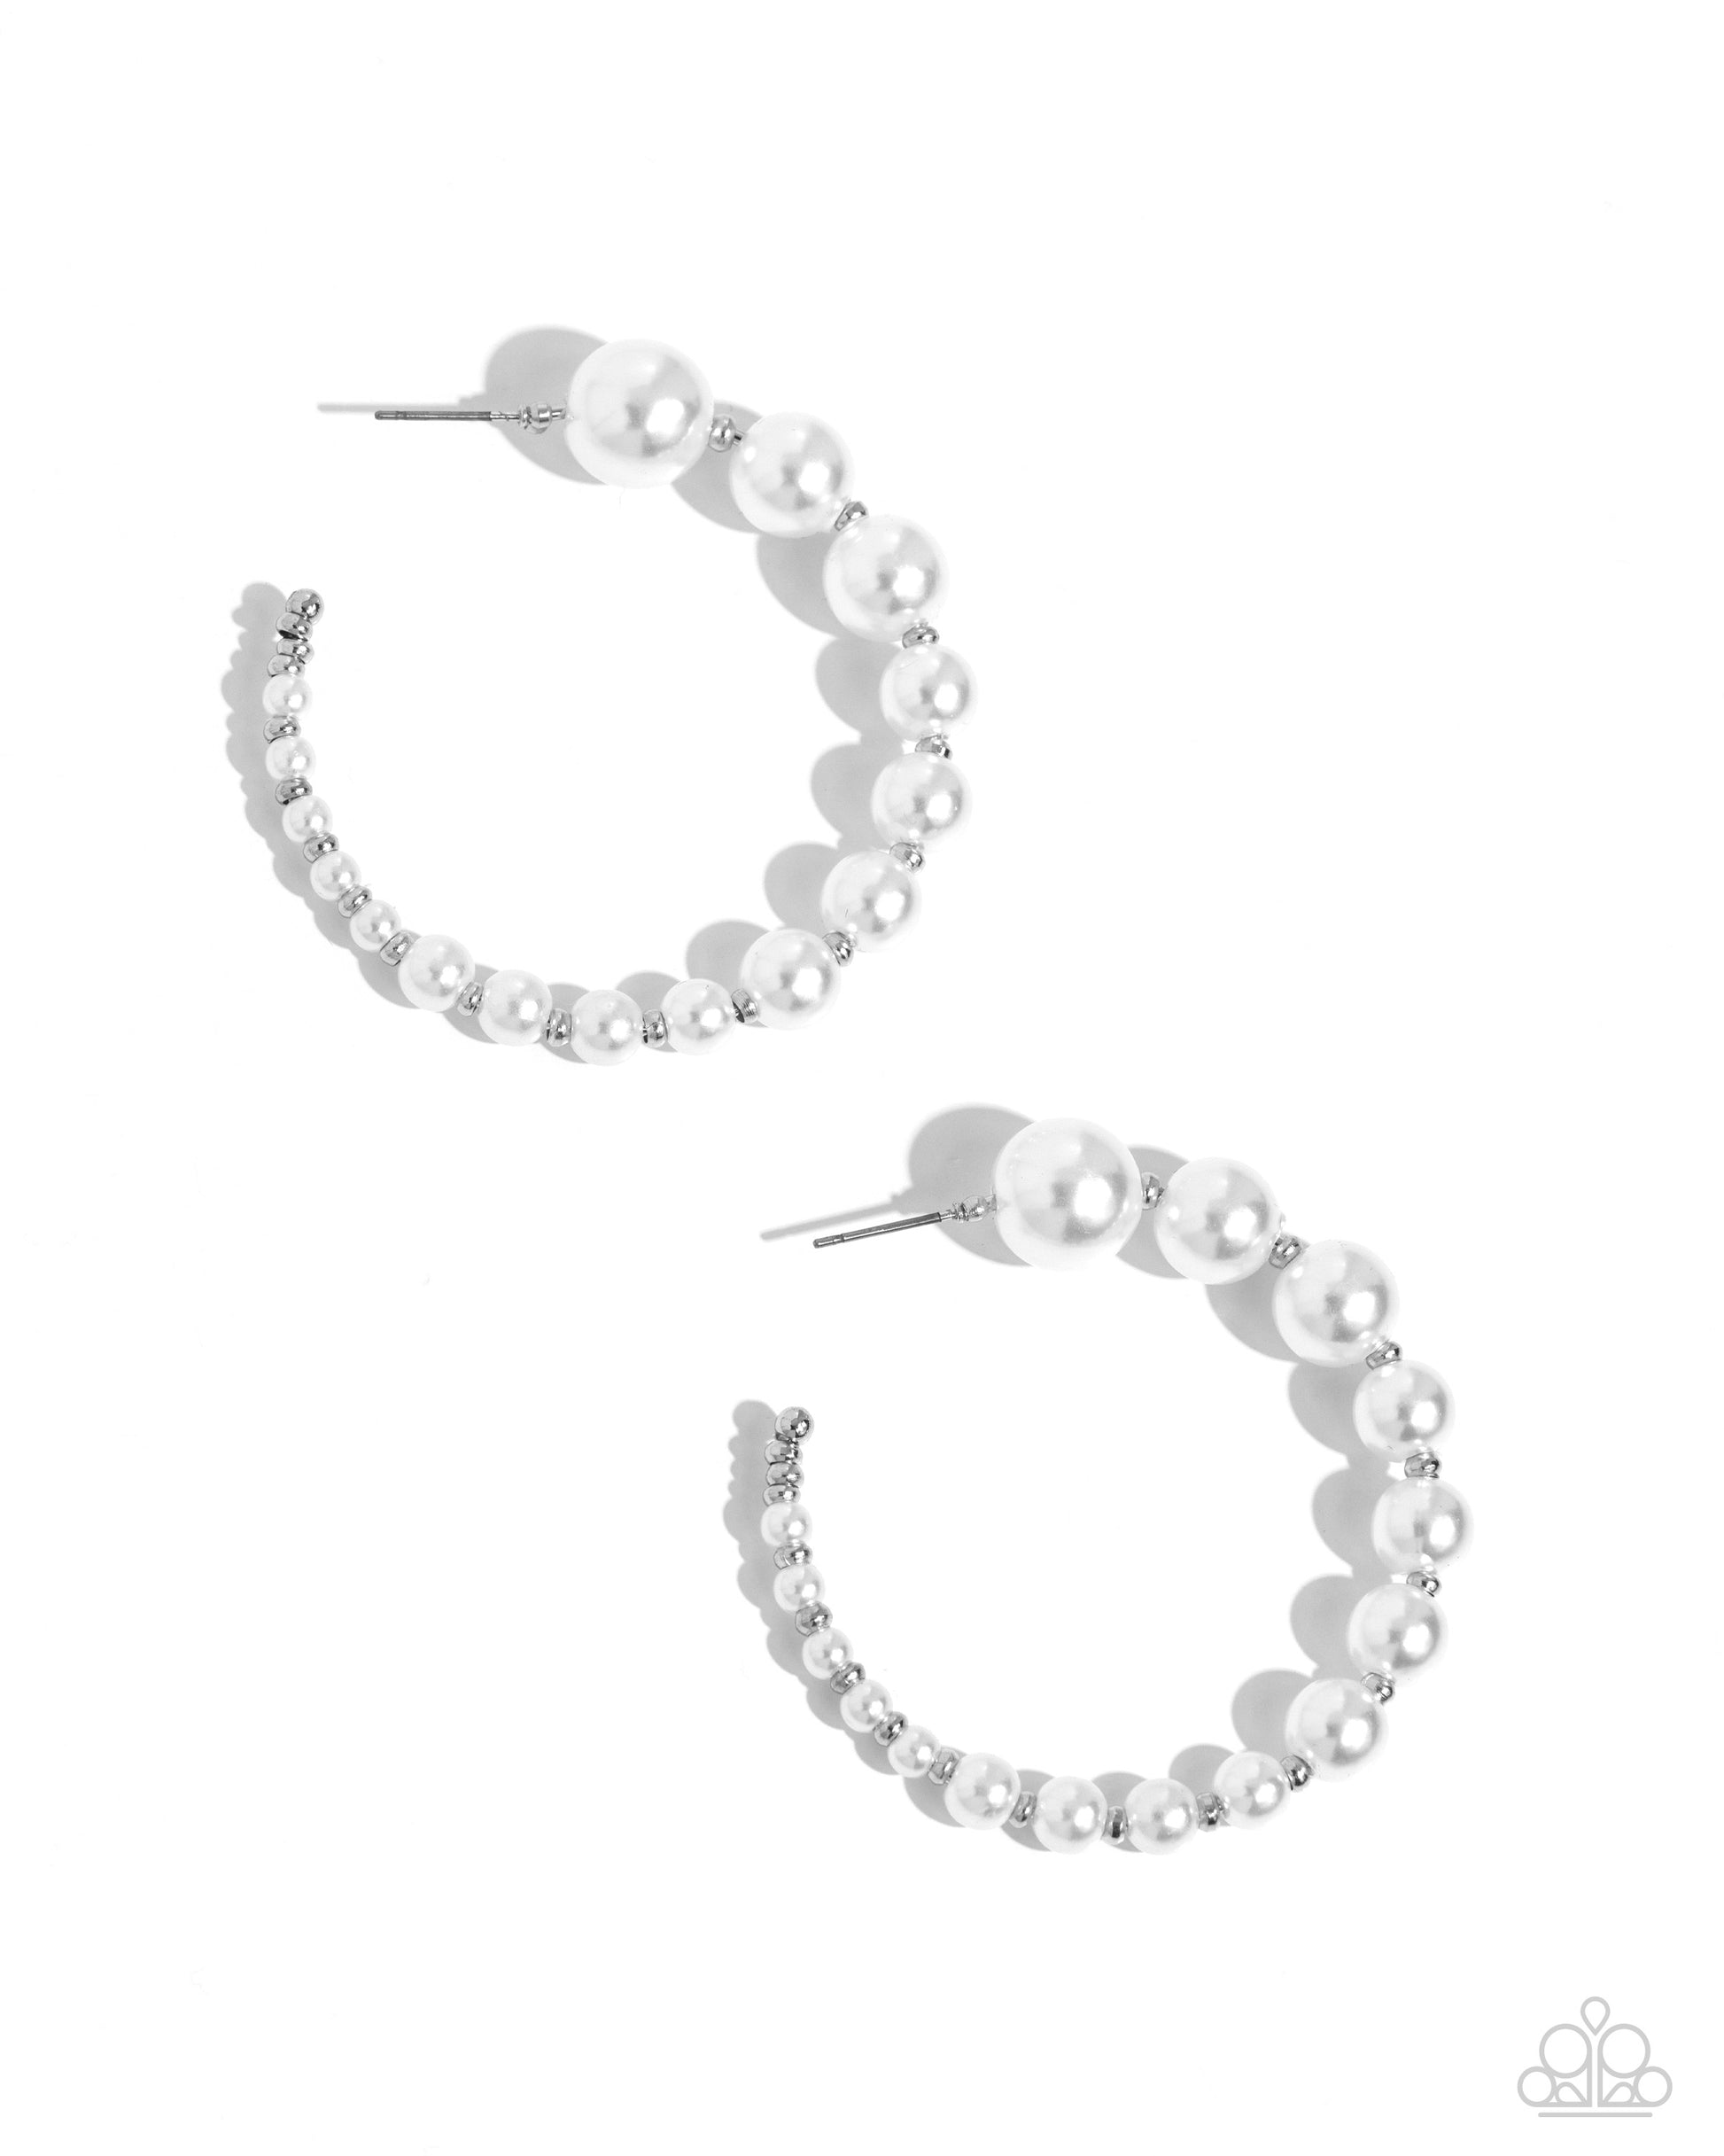 <p data-mce-fragment="1">Paparazzi Accessories - Candidate Class - White Earrings hradually decreasing in size, glossy white pearls alternate with high-sheen, dainty silver beads for a refined hoop. Earring attaches to a standard post fitting. Hoop measures approximately 2" in diameter.</p> <p data-mce-fragment="1"><i data-mce-fragment="1">Sold as one pair of hoop earrings.</i></p>